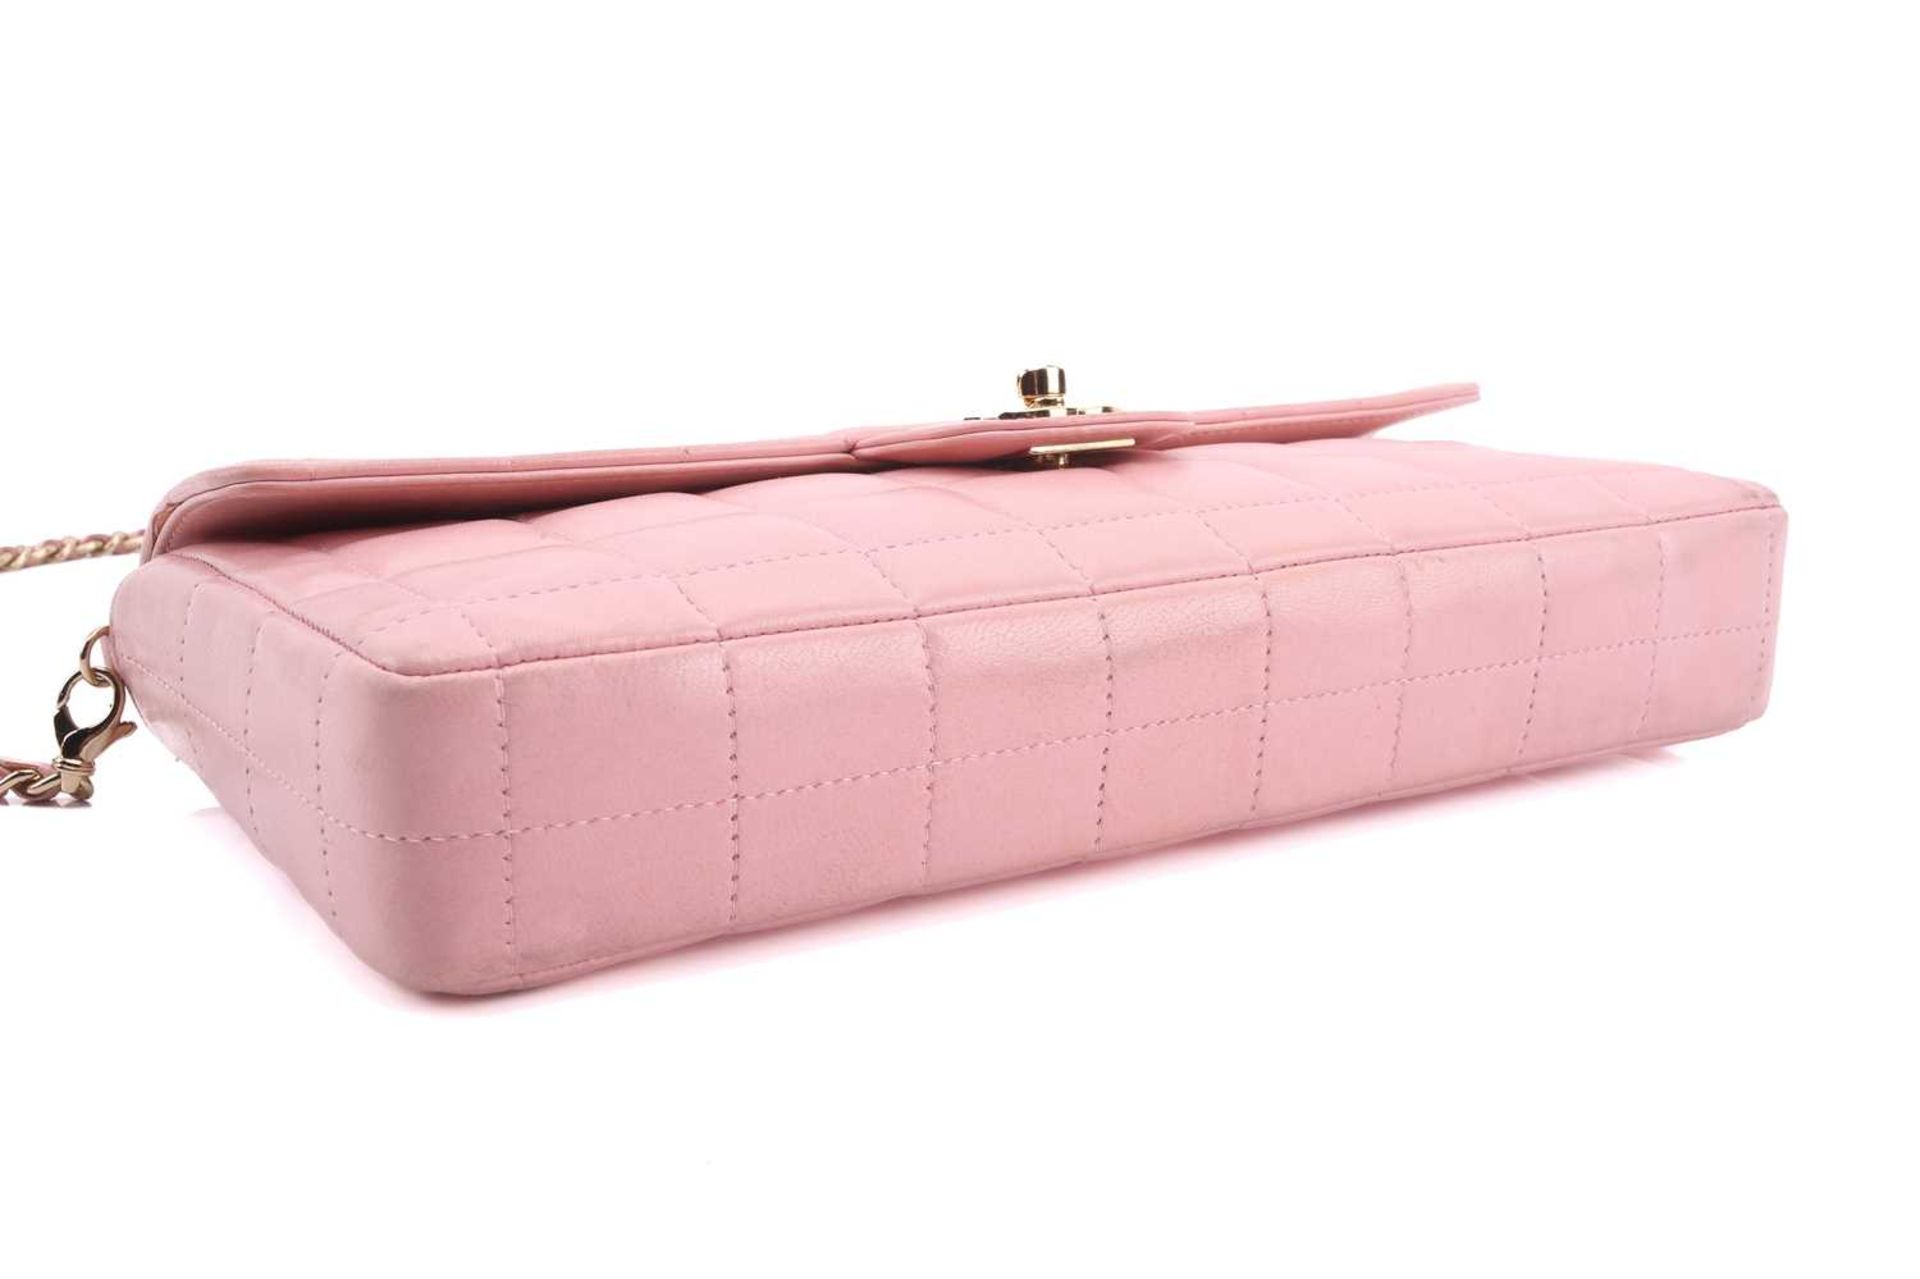 Chanel - an East West Chocolate Bar bag in baby pink lambskin leather, elongated rectangular body - Image 10 of 13